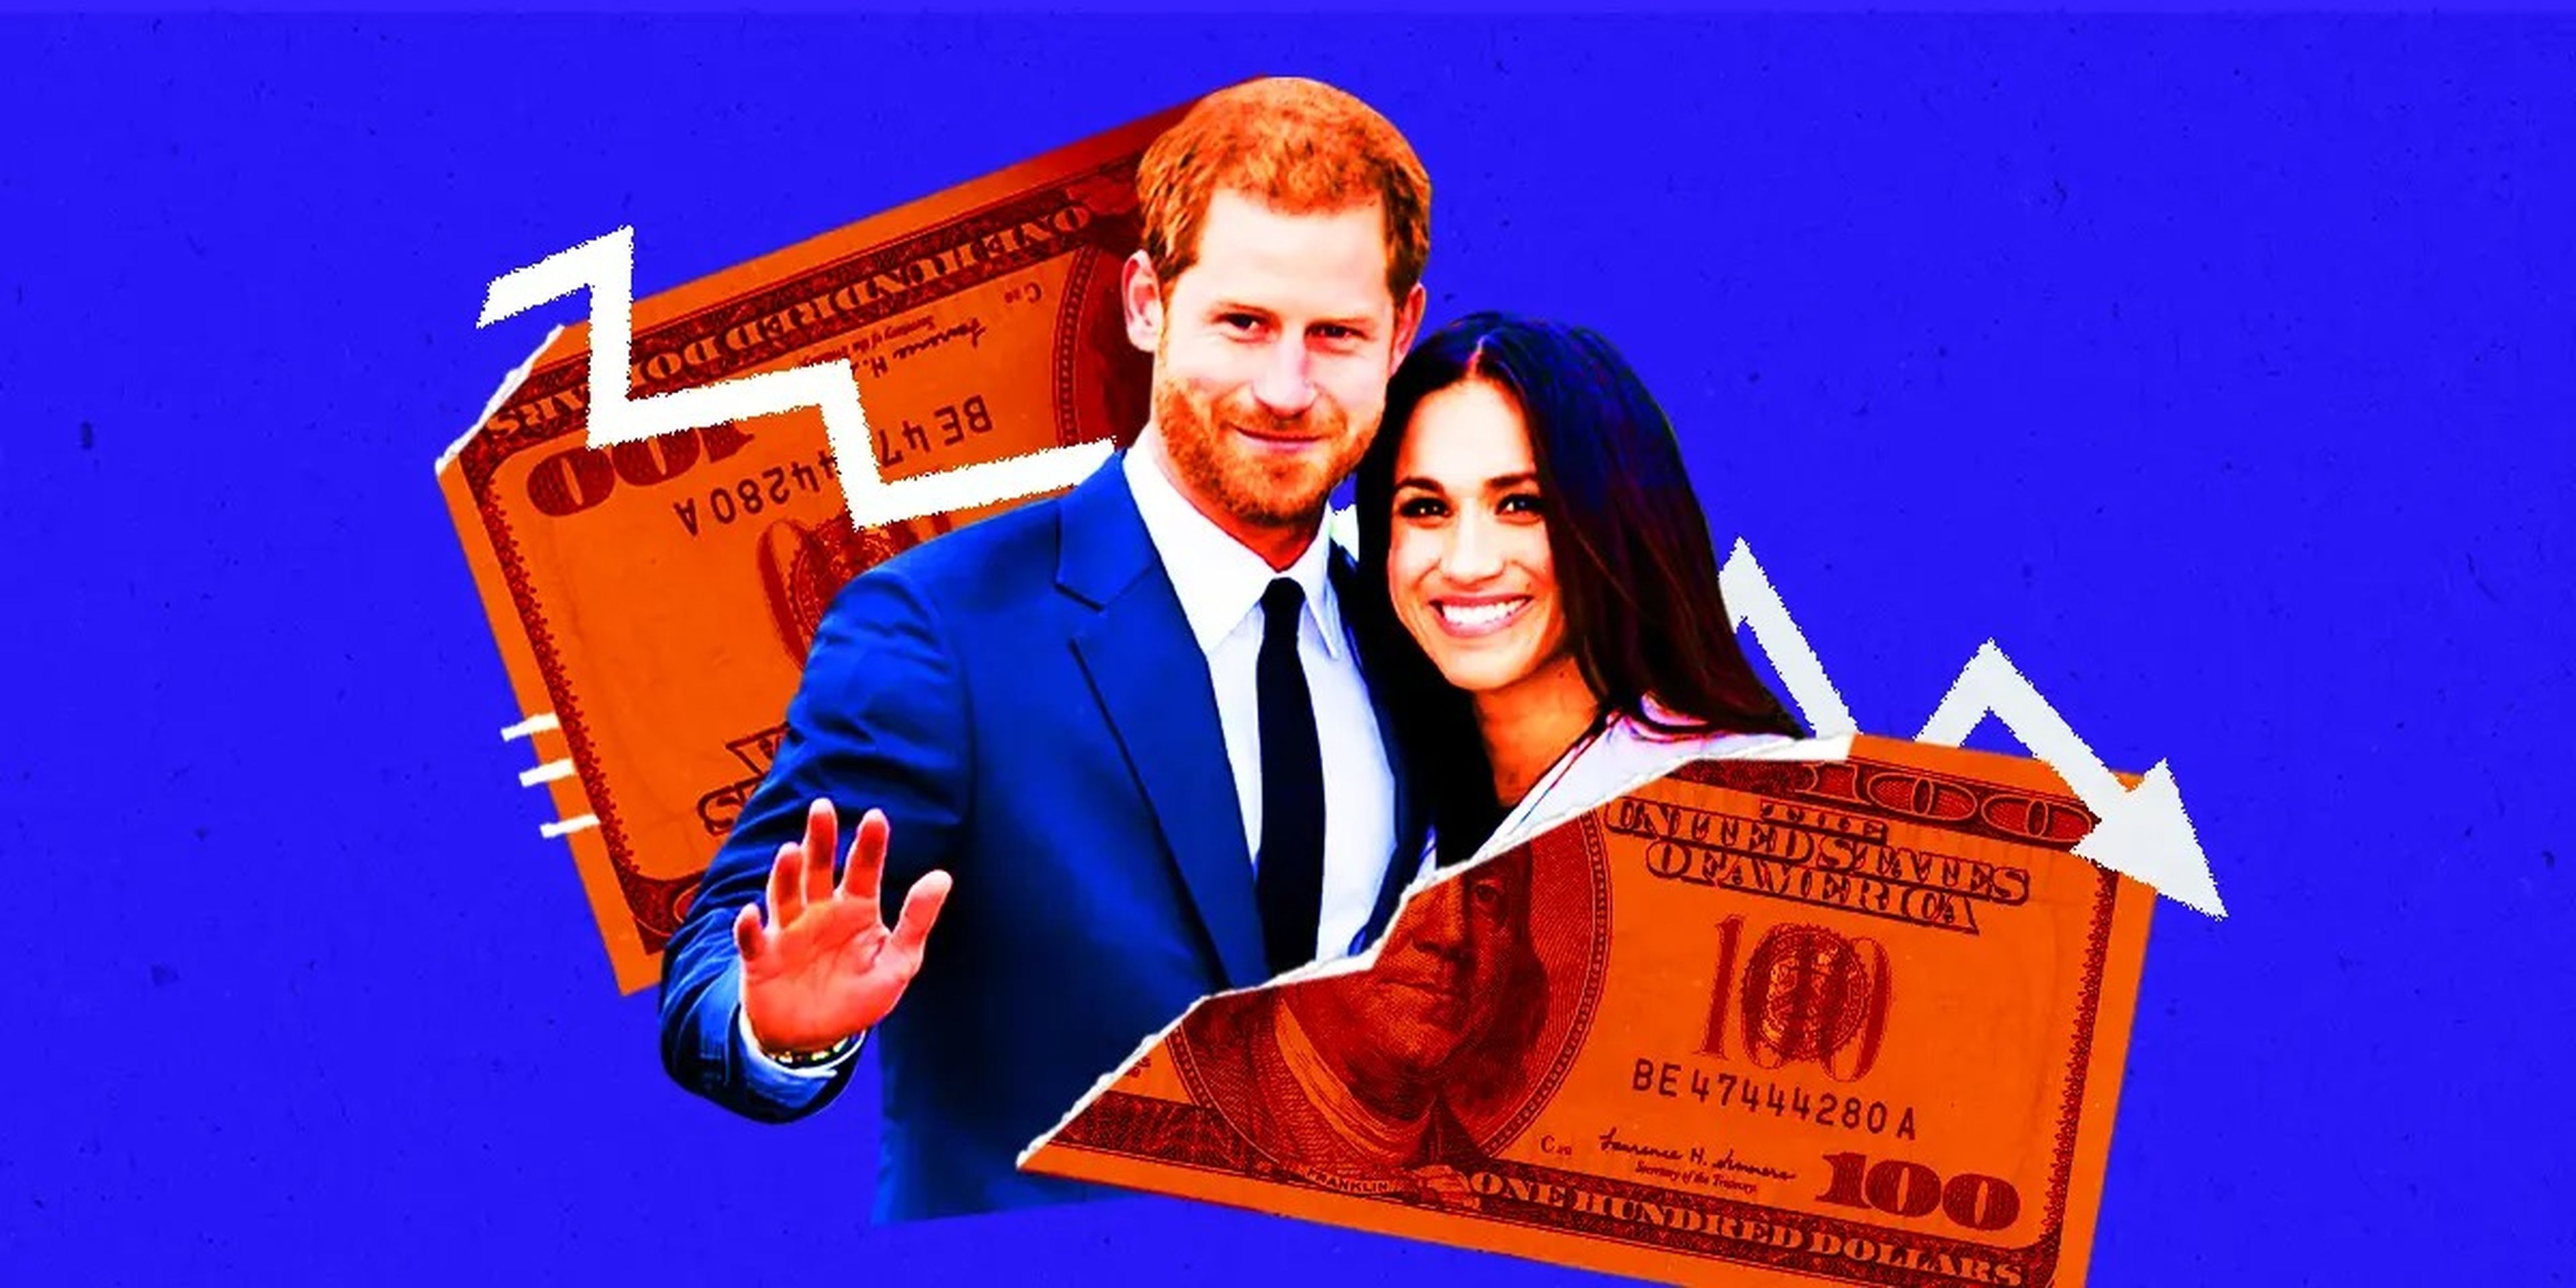 Prince Harry and Meghan Markle divided by a ripped $100 bill with a downward trending line